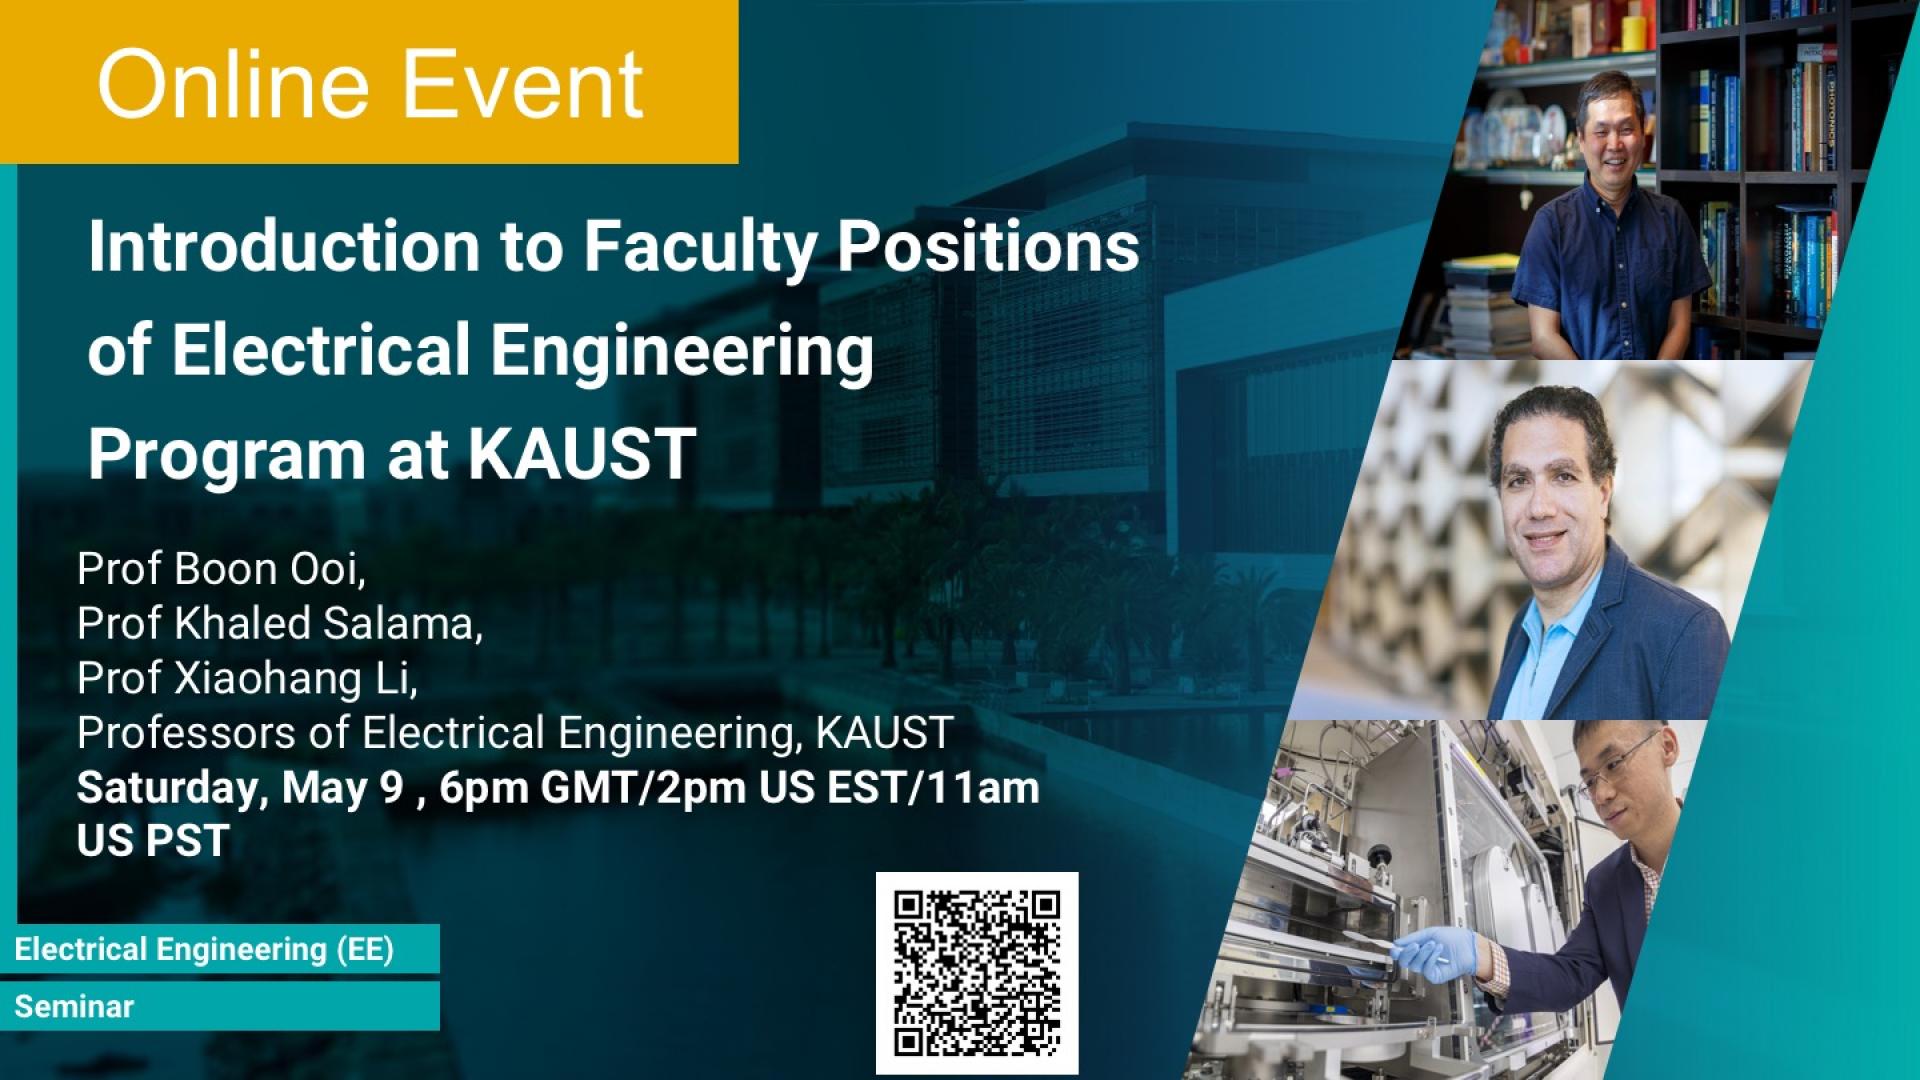 KAUST CEMSE EE Semiconductor Seminar Introduction to Faculty Positions of Electrical Engineering Program at KAUST.jpg